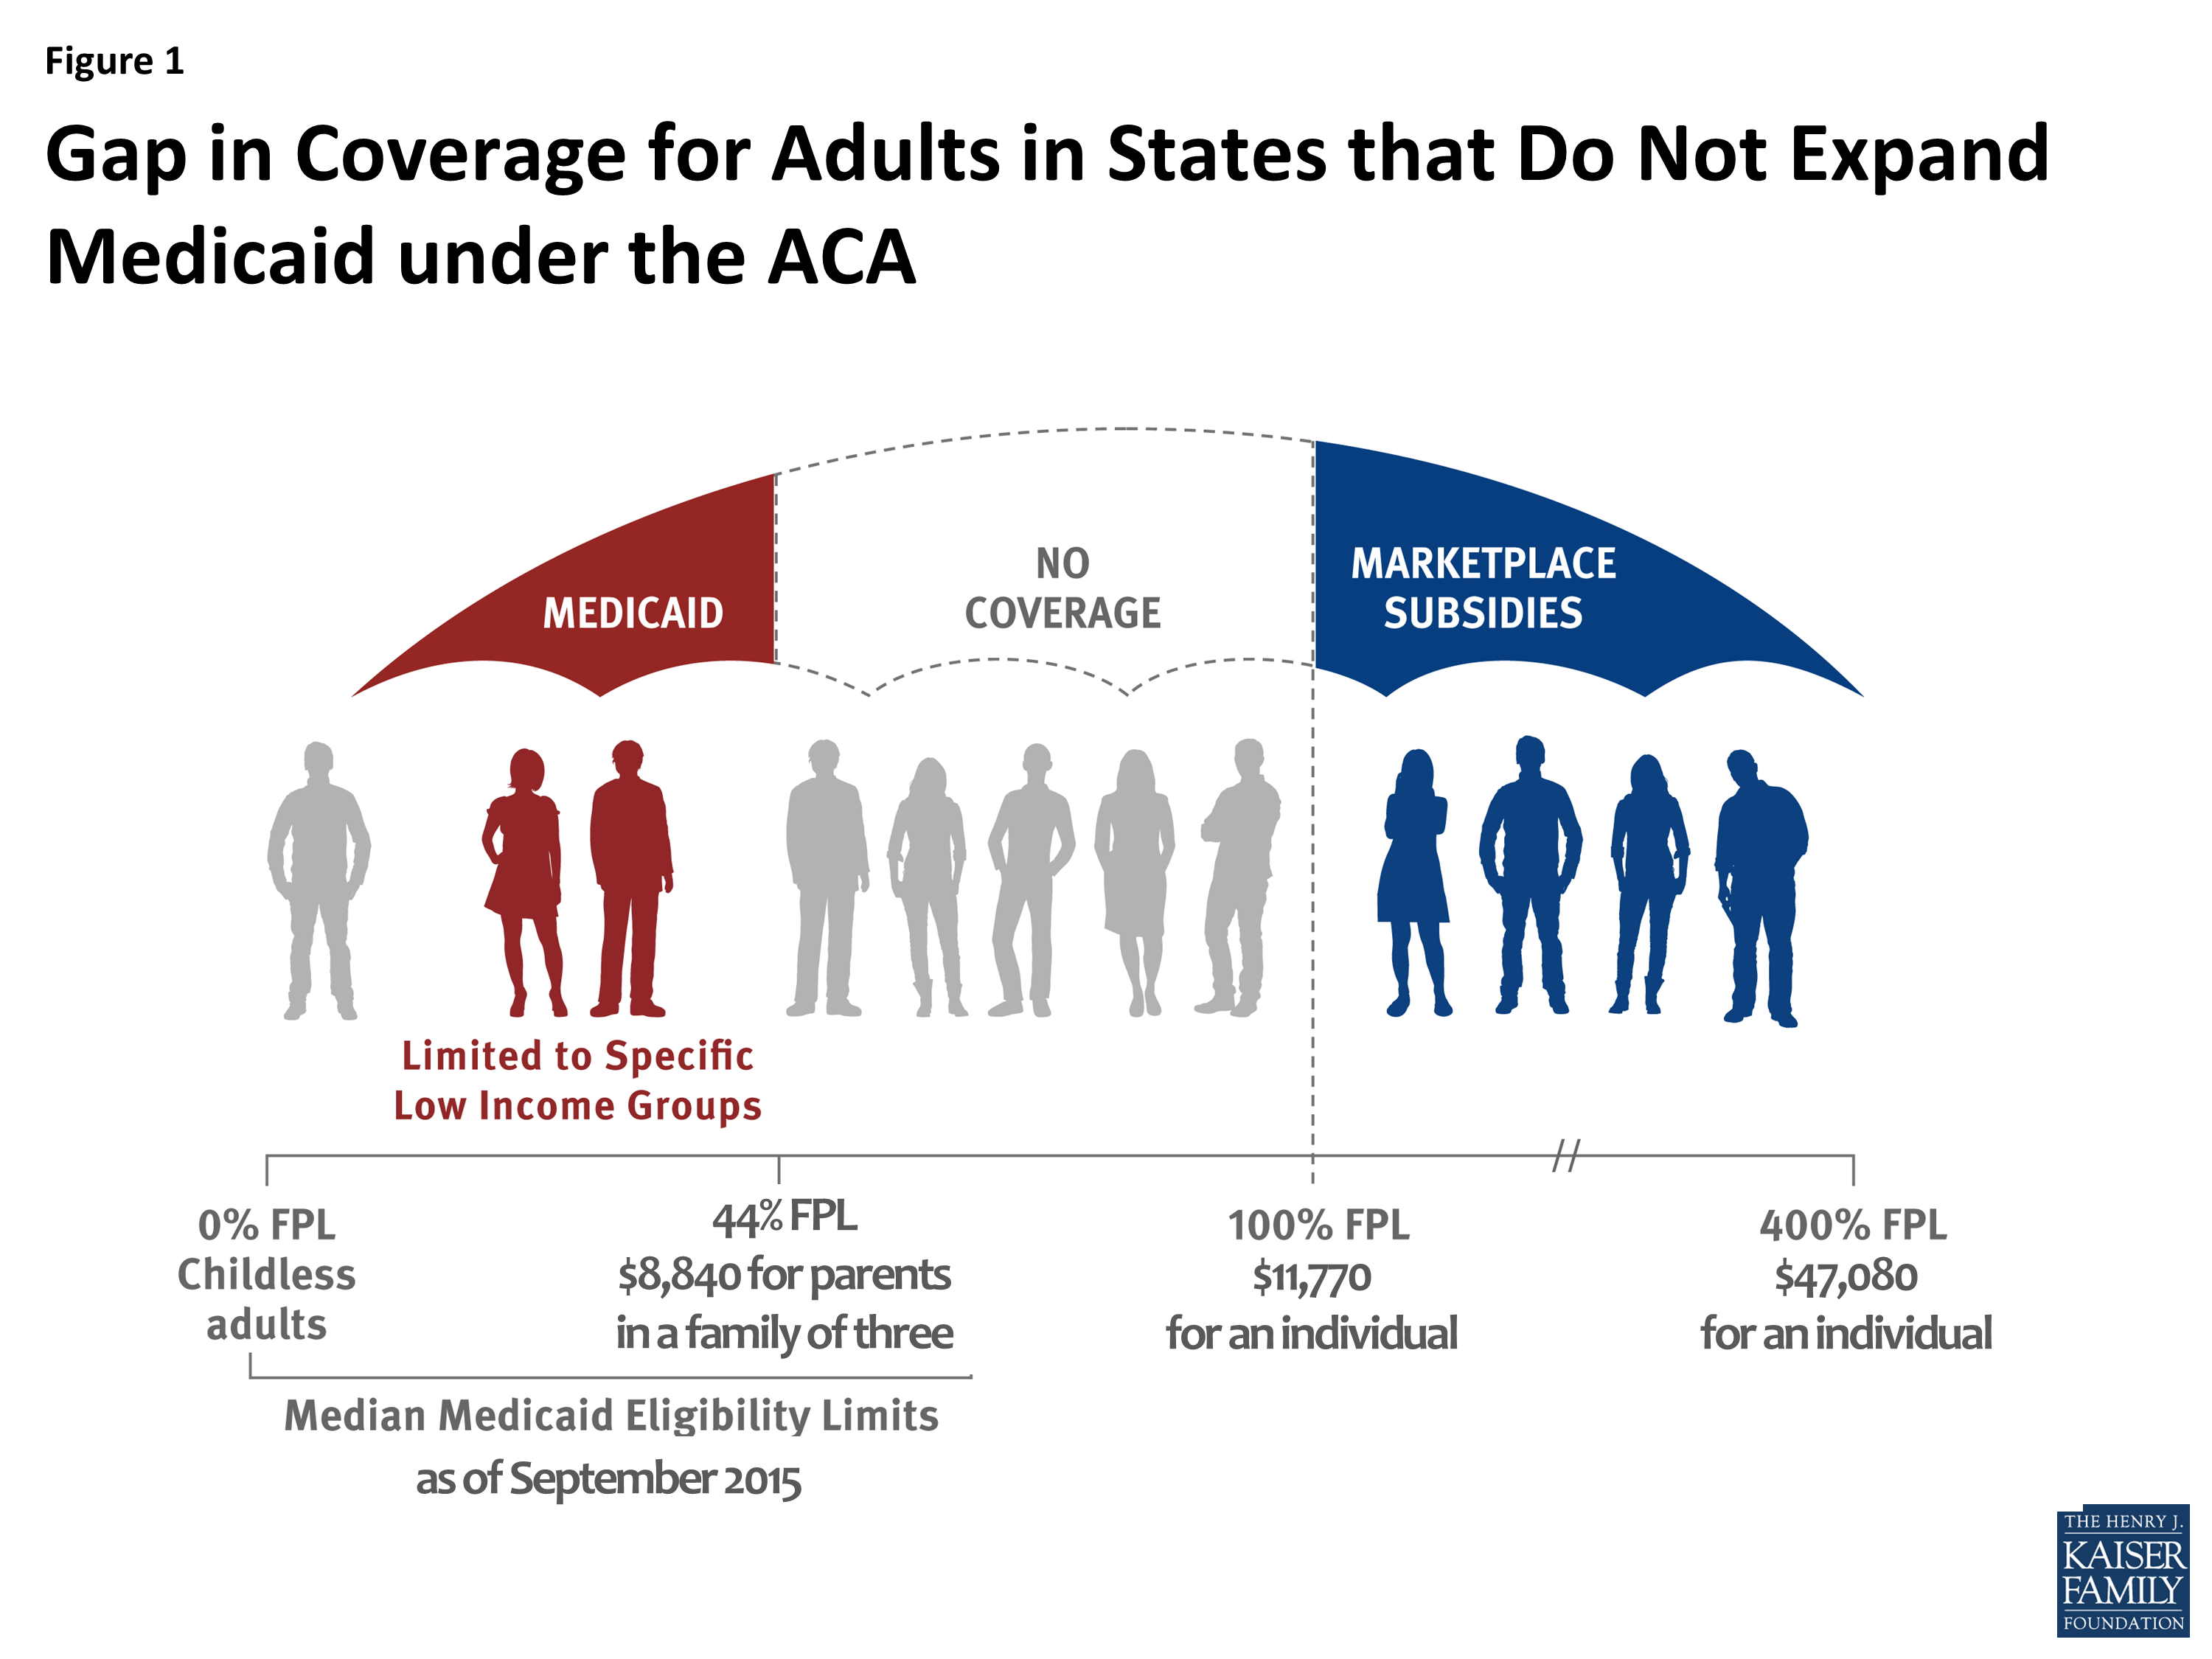 Federal Policy May Temporarily Close the Coverage Gap, But Long-term  Coverage May Fall Back to States